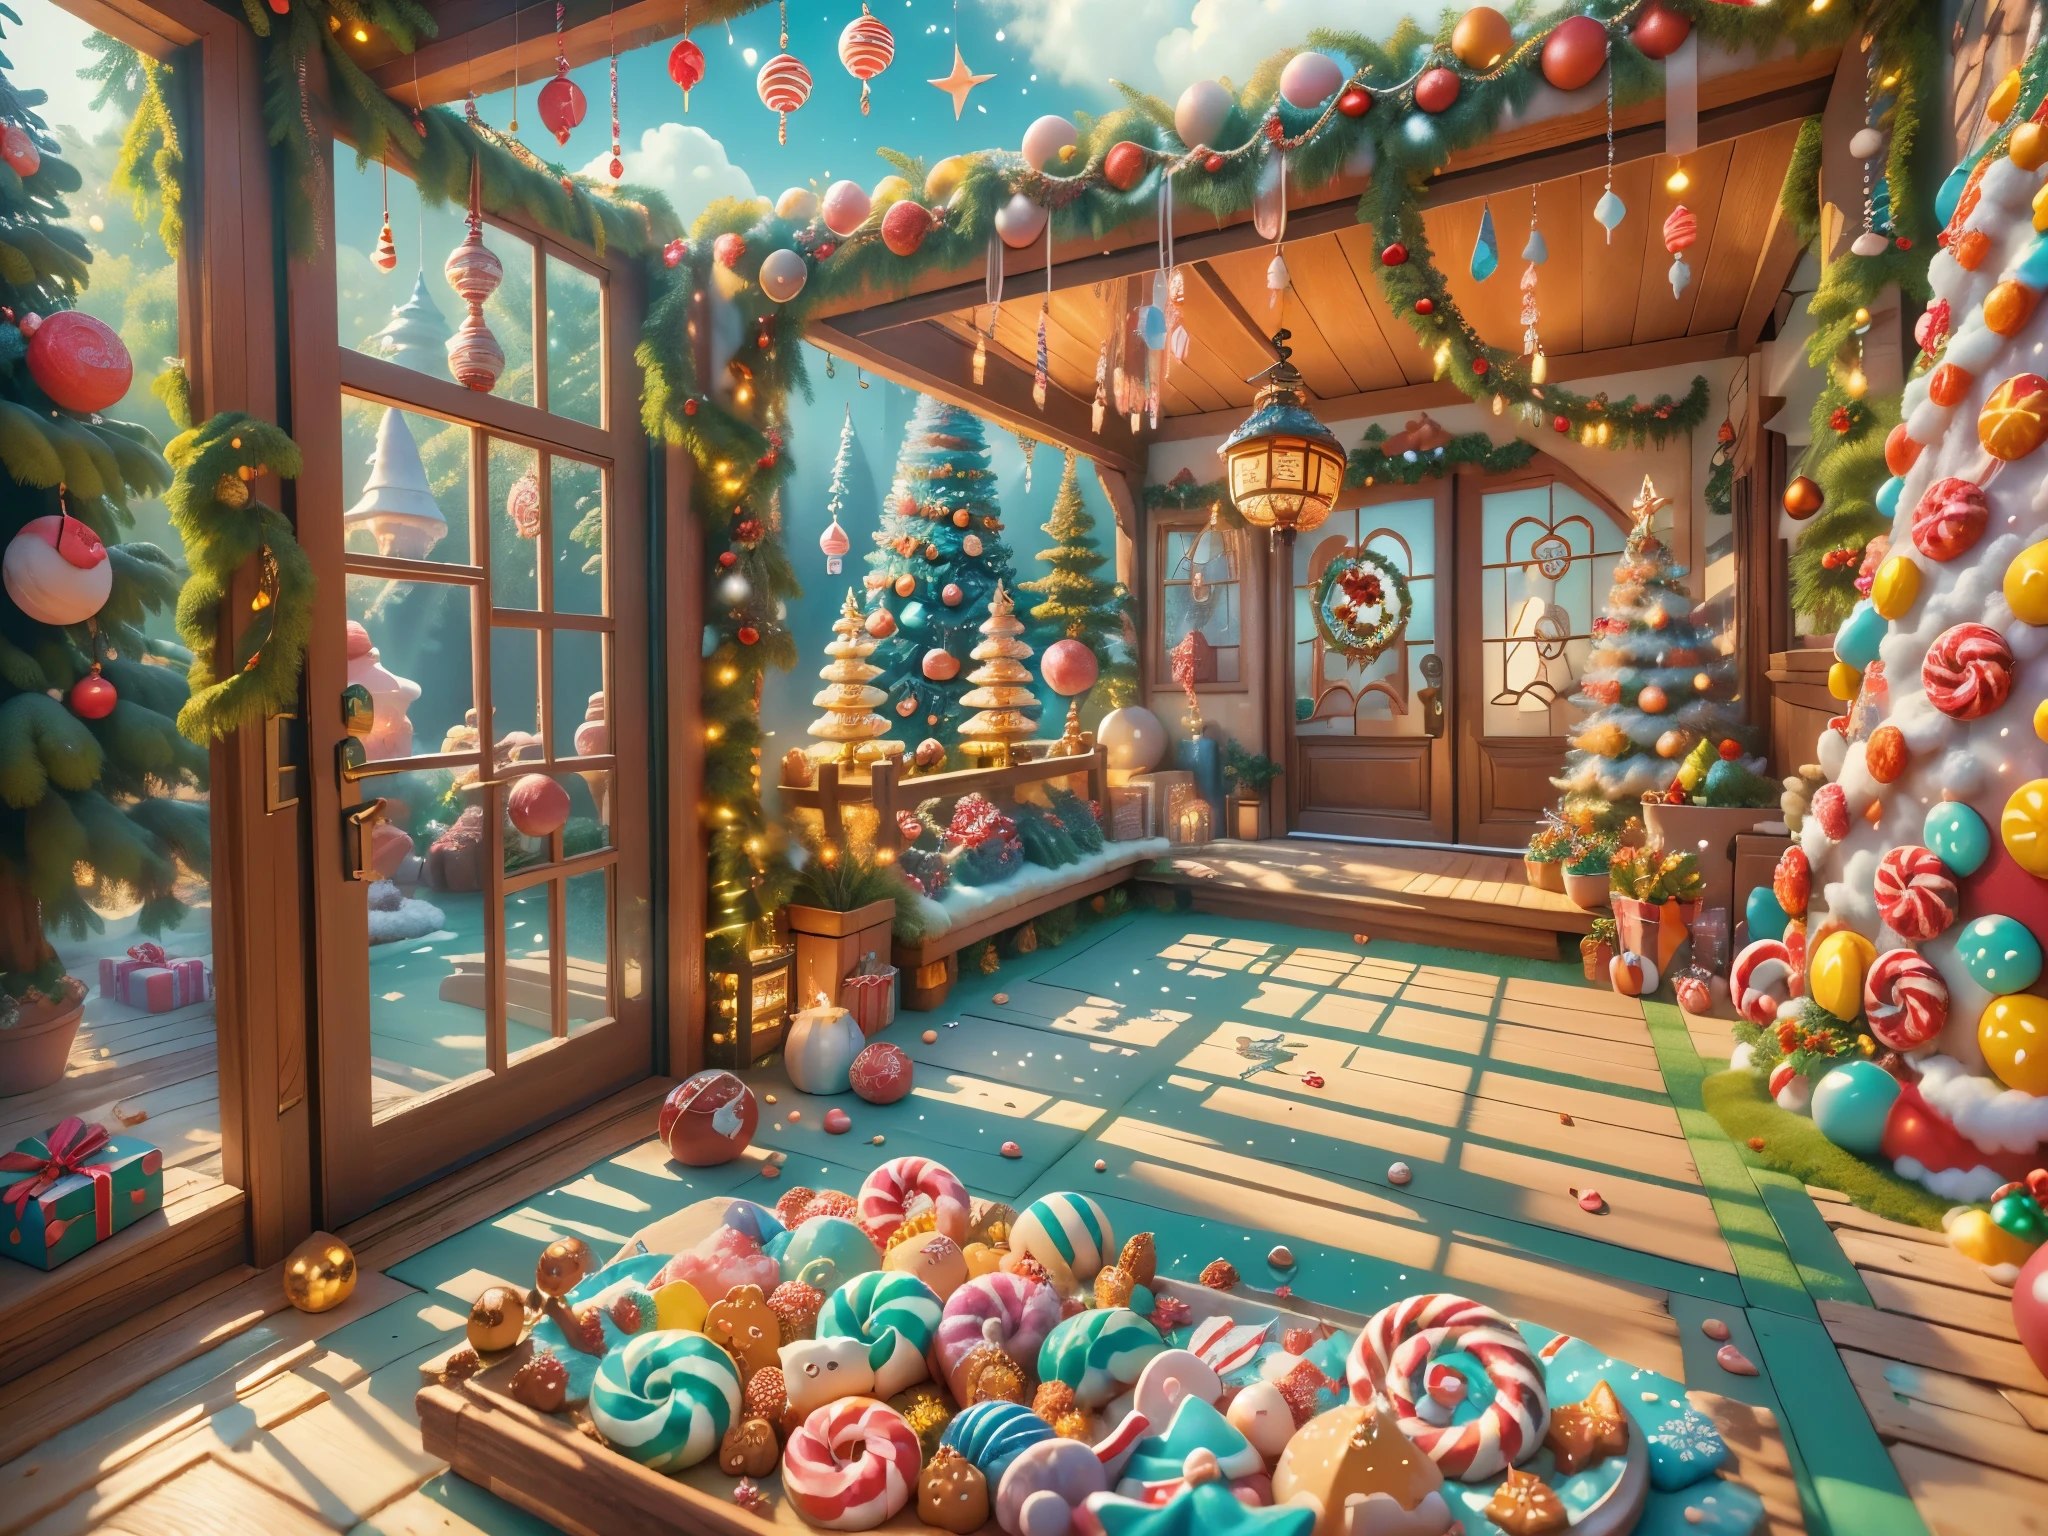 (tmasterpiece),（ultra - detailed:1.3），(Close-up: 1.8), Best quality，（Marshmallow-like white yuki:1.2），（Christmas courtyard in blue fairy tale:1.6），(Christmas decorationlower ring on blue door: 1.8),（suns），(((Delicious candies in front of the door，Christmas tree, gifts, Christmas stockings, cute gingerbread man，chocolate house splash))), Illustration style, decorations, Fantasy Christmas small courtyard, Lovely design style, yuki，rays of sunshine，vivd colour、 ((Whimsical and charming fantasy)), Surreal portrait, (Fantasy themed Christmas cabin), (Whimsical Christmas Accessories), (Colorful, Landscape full of candy), (enchanting, magical Christmas tree), (A vibrant one, Candy-colored courtyard), (Candy Road), (blue candy door) in distance, (Like a mirror, Asymmetrical tmasterpiece watch accessories), (rich, fantasticcolors), (warm rays of sunshine), (four dimensional dream), (enchanting atmosphere), (Playful composition), (Vivid rays of sunshine effects), 1.4x realism，hyper HD，Shown in this beautiful scene，(Very meticulous，Reasonable design，Clear lines，High- sharpness，tmasterpiece，offcial art，movie light effect，8k)